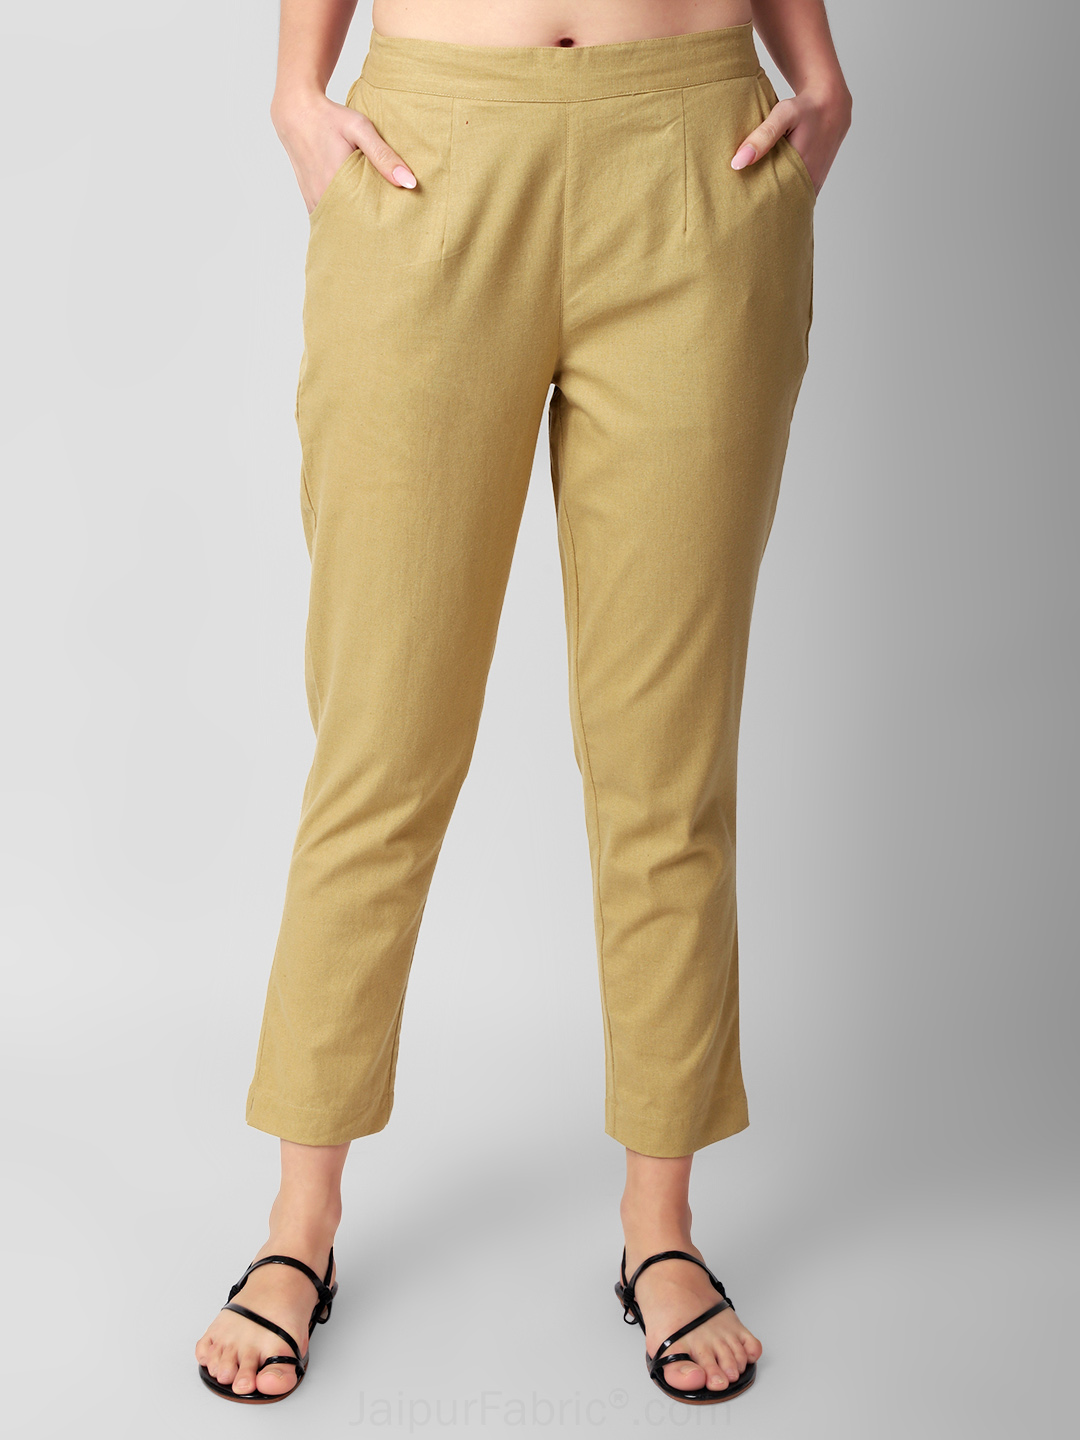 Sandy Beige Women Cotton Pants casual and semi formal daily trousers